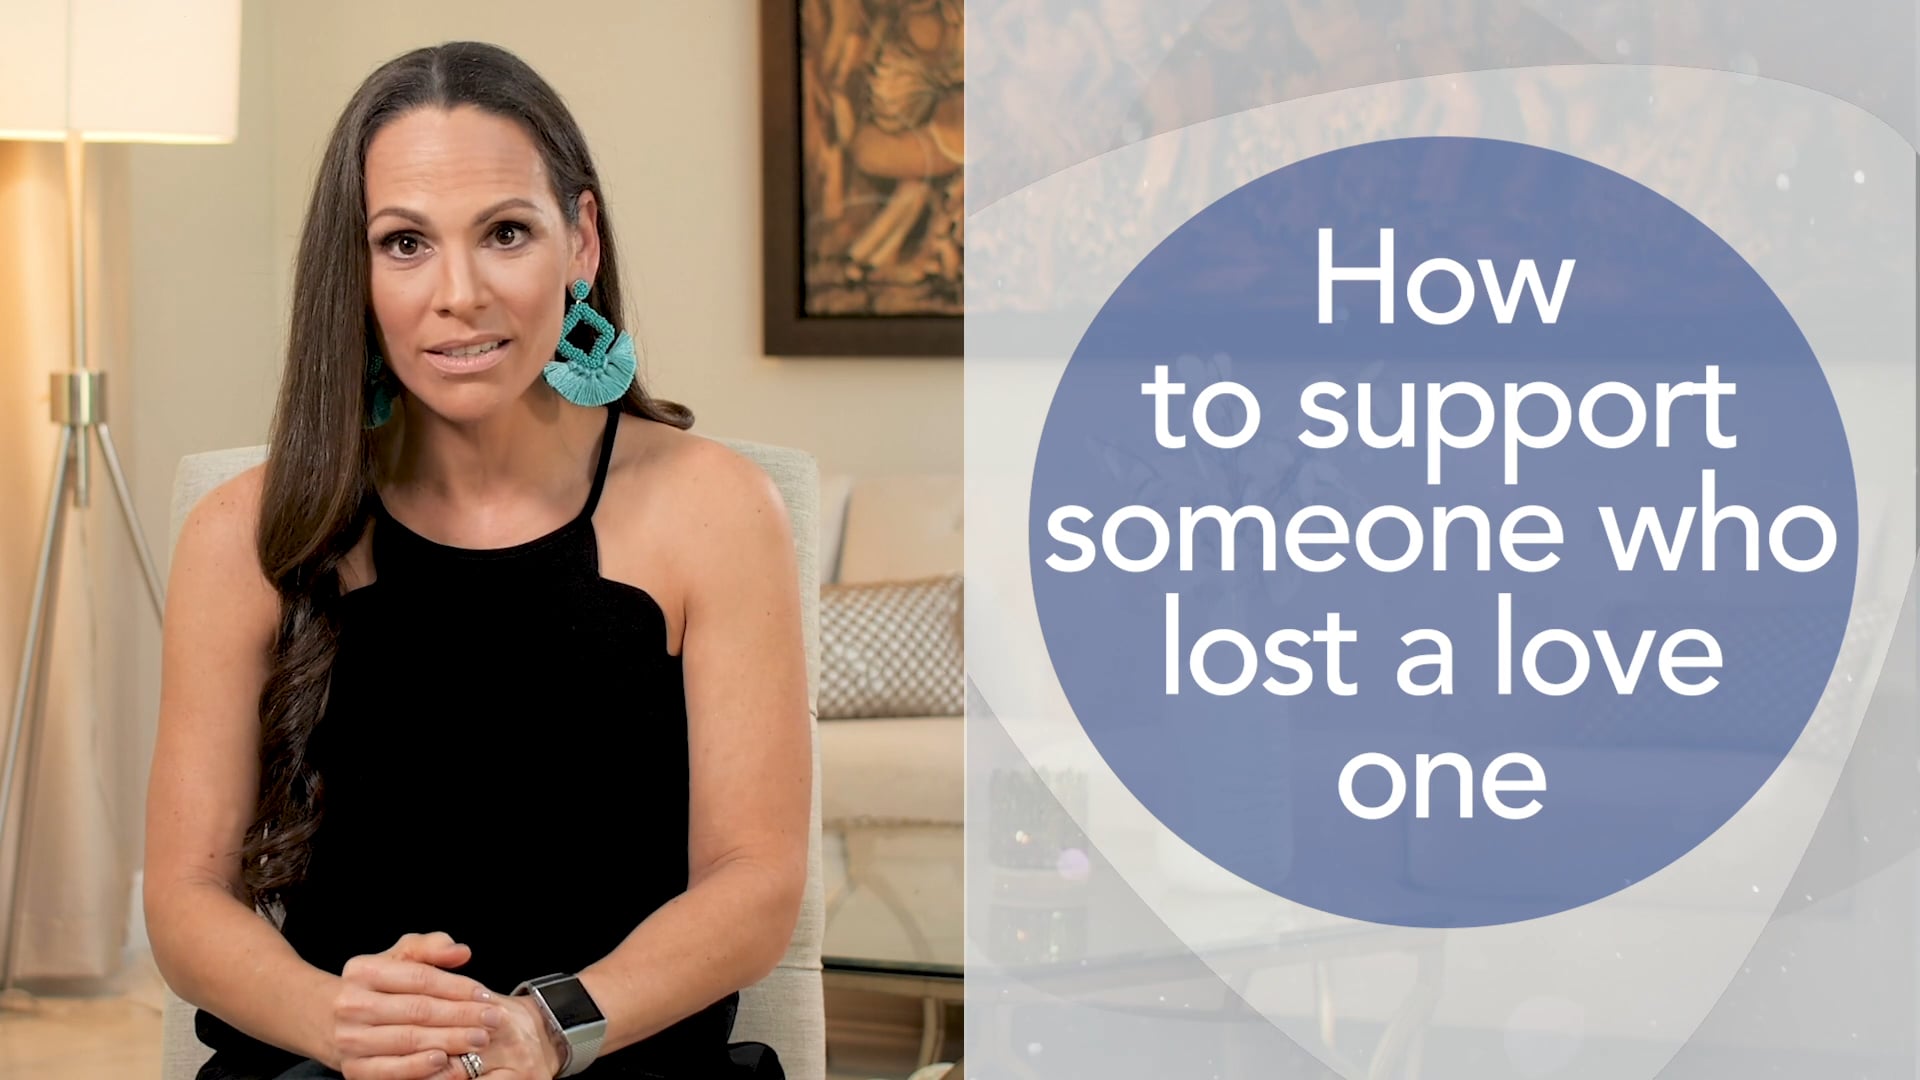 BETSY GUERRA - HOW TO SUPPORT SOMEONE WHO LOST A LOVED ONE